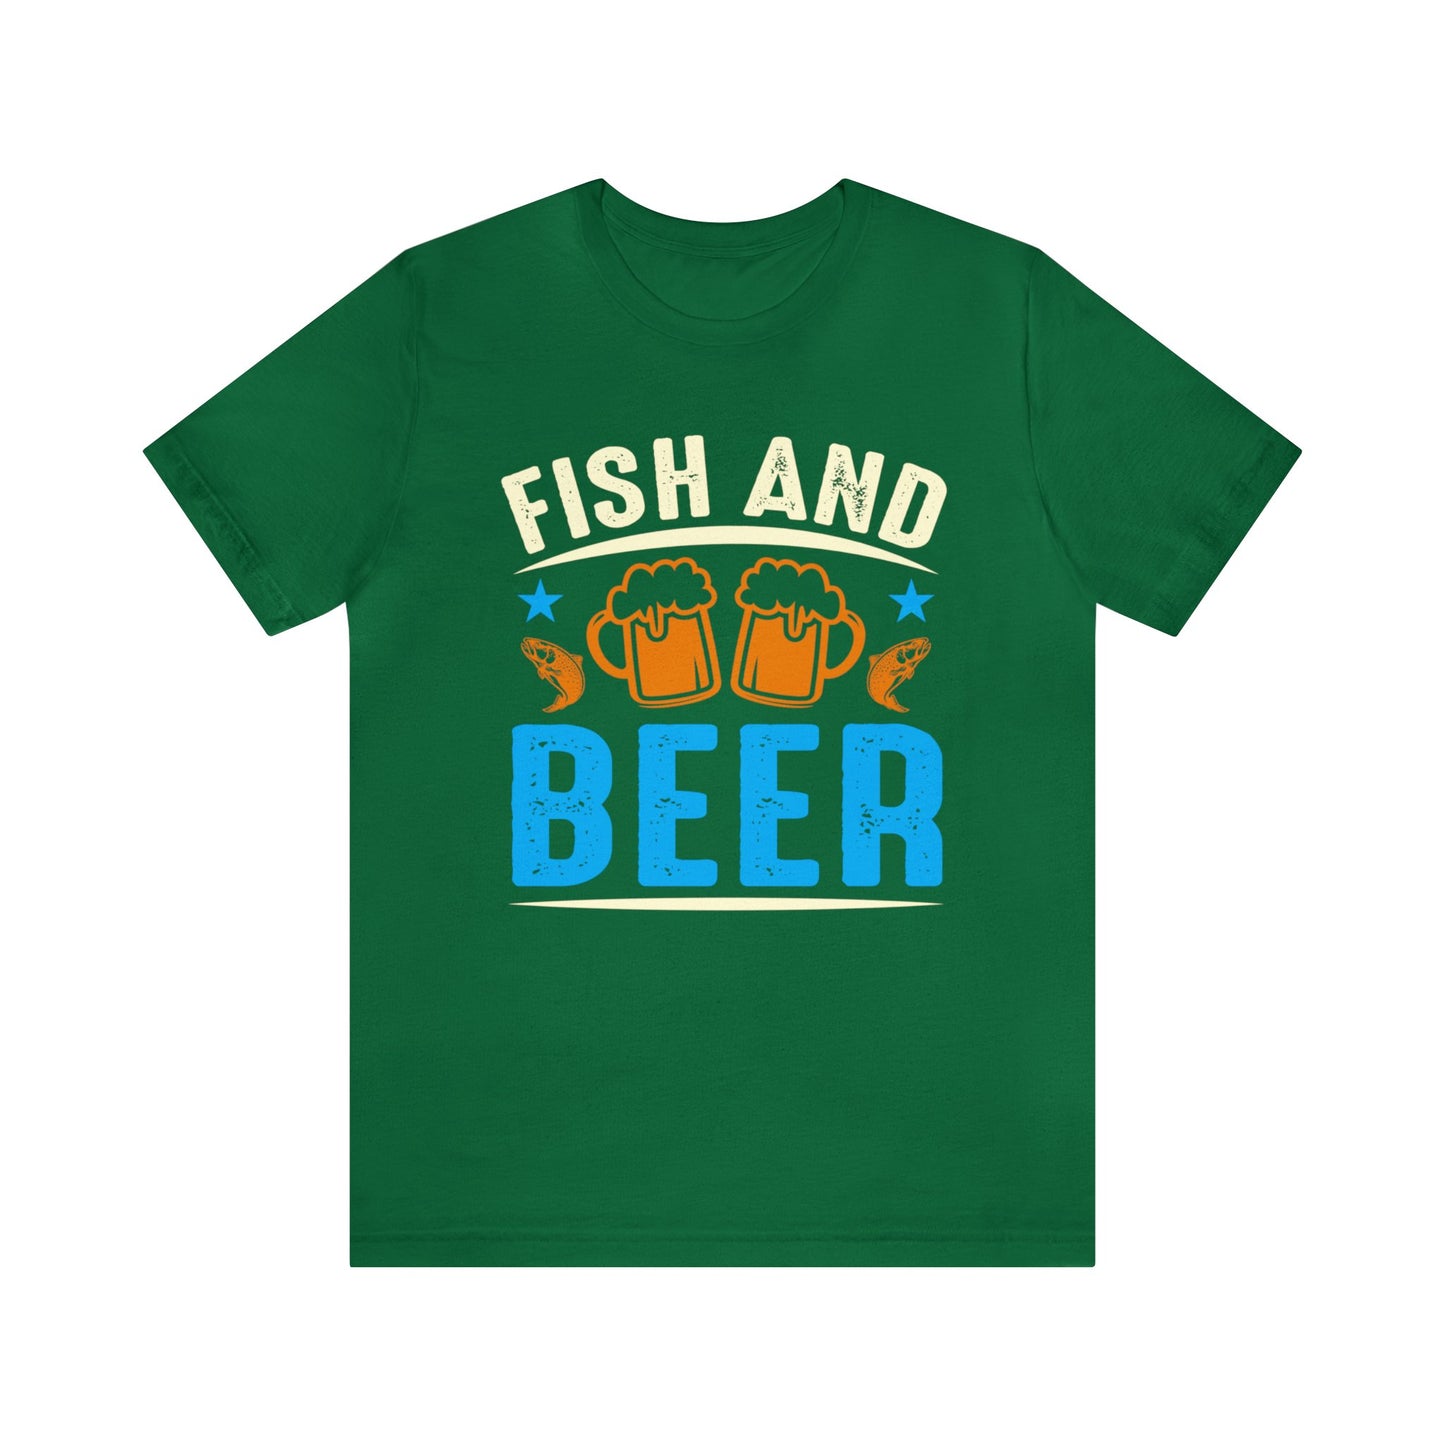 Reel in Style with Our Exclusive 'Fish and Beer' Graphic T-Shirt